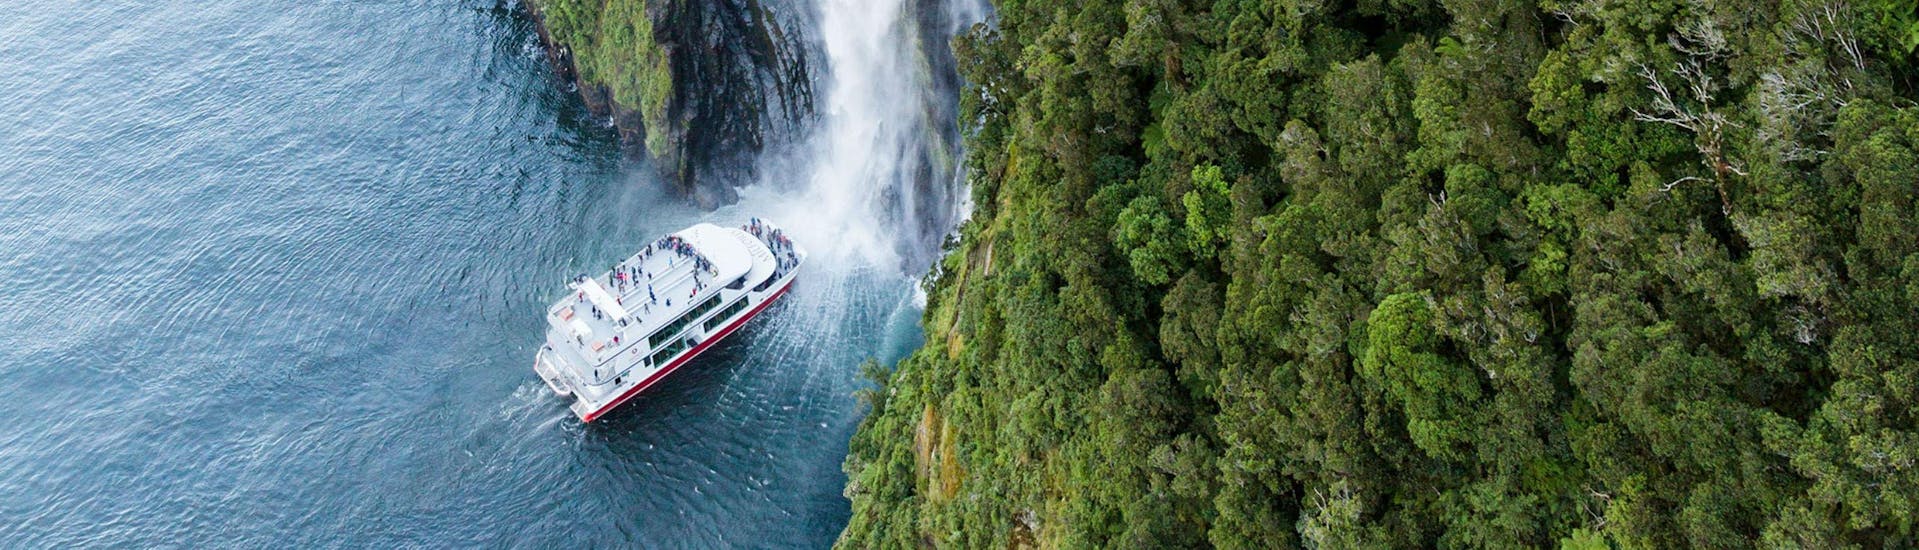 One of the catamarans operated by Southern Discoveries can be seen approaching a waterfall during the Milford Sound Scenic Day Trip from Queenstown - Winter.